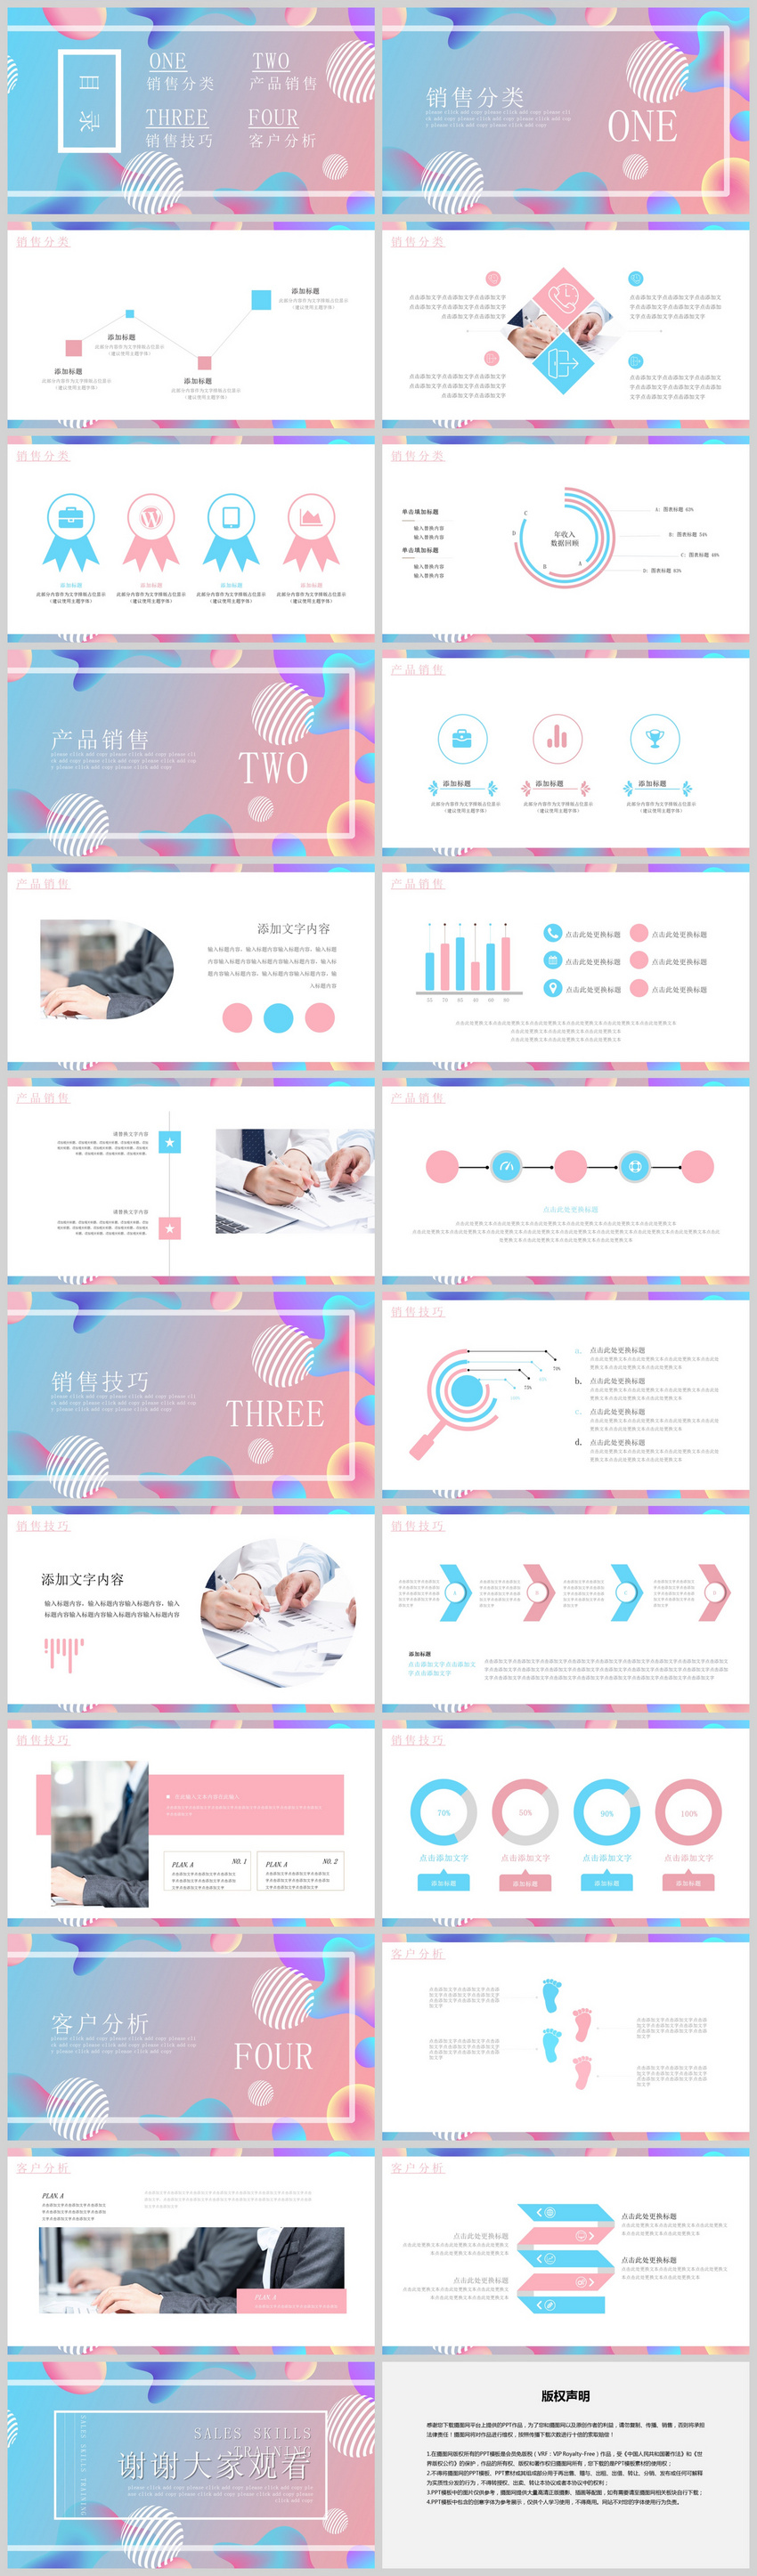 Sales Training Template from img.lovepik.com